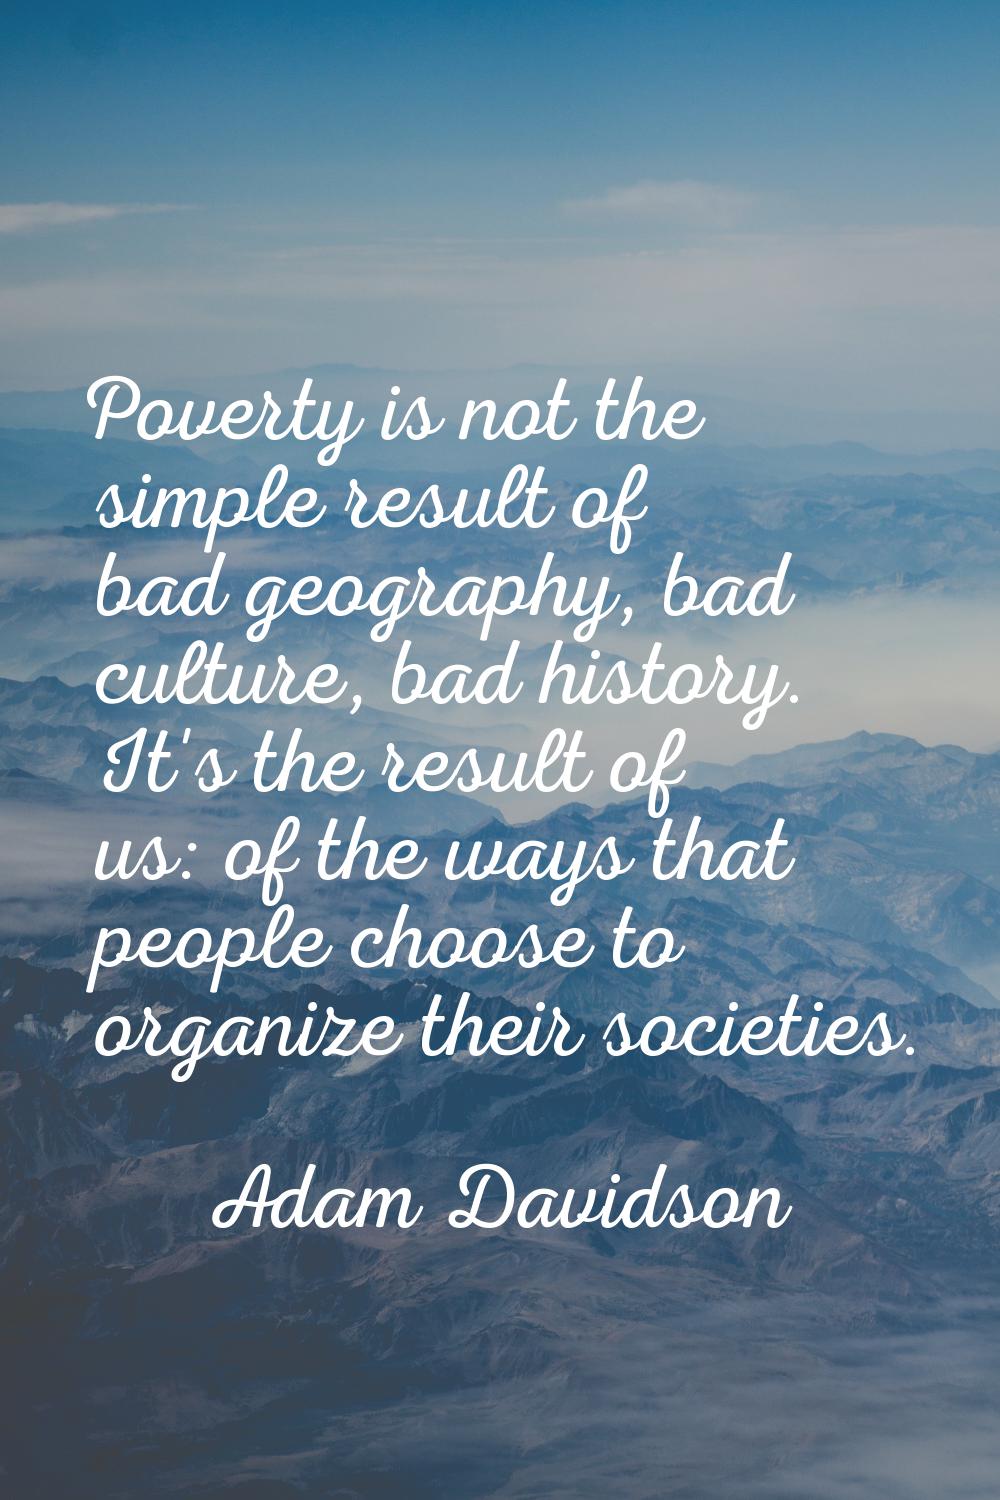 Poverty is not the simple result of bad geography, bad culture, bad history. It's the result of us: